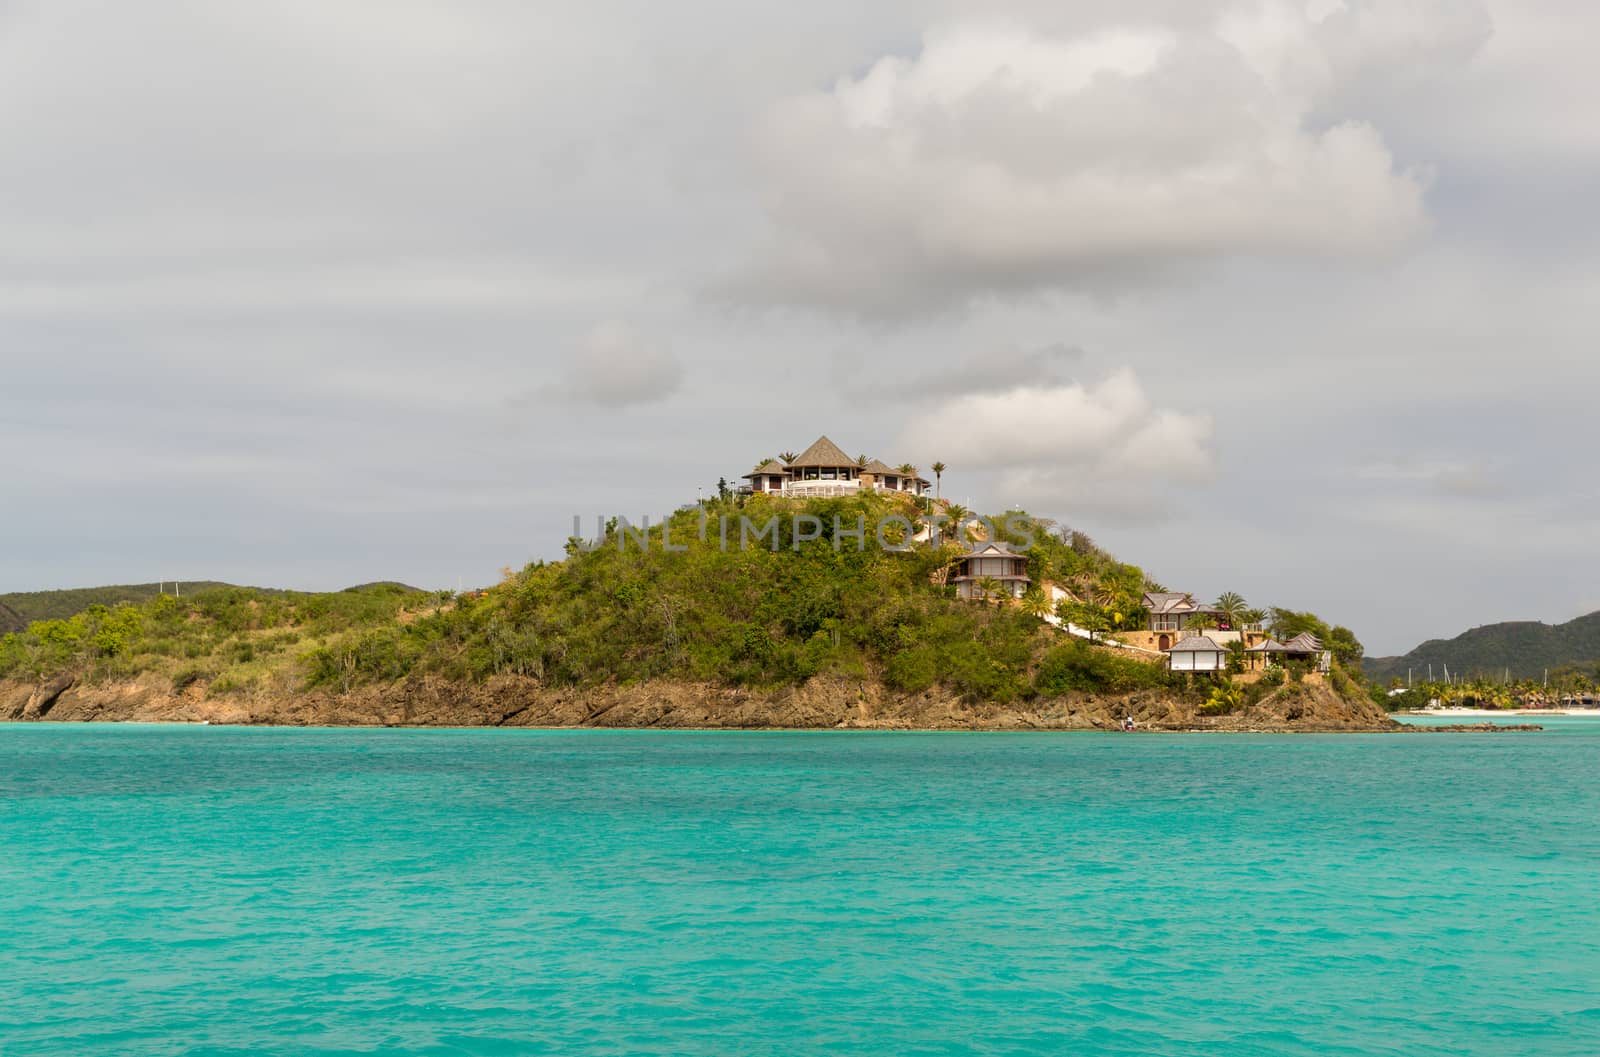 A small series of houses perched on the Antigua coastline